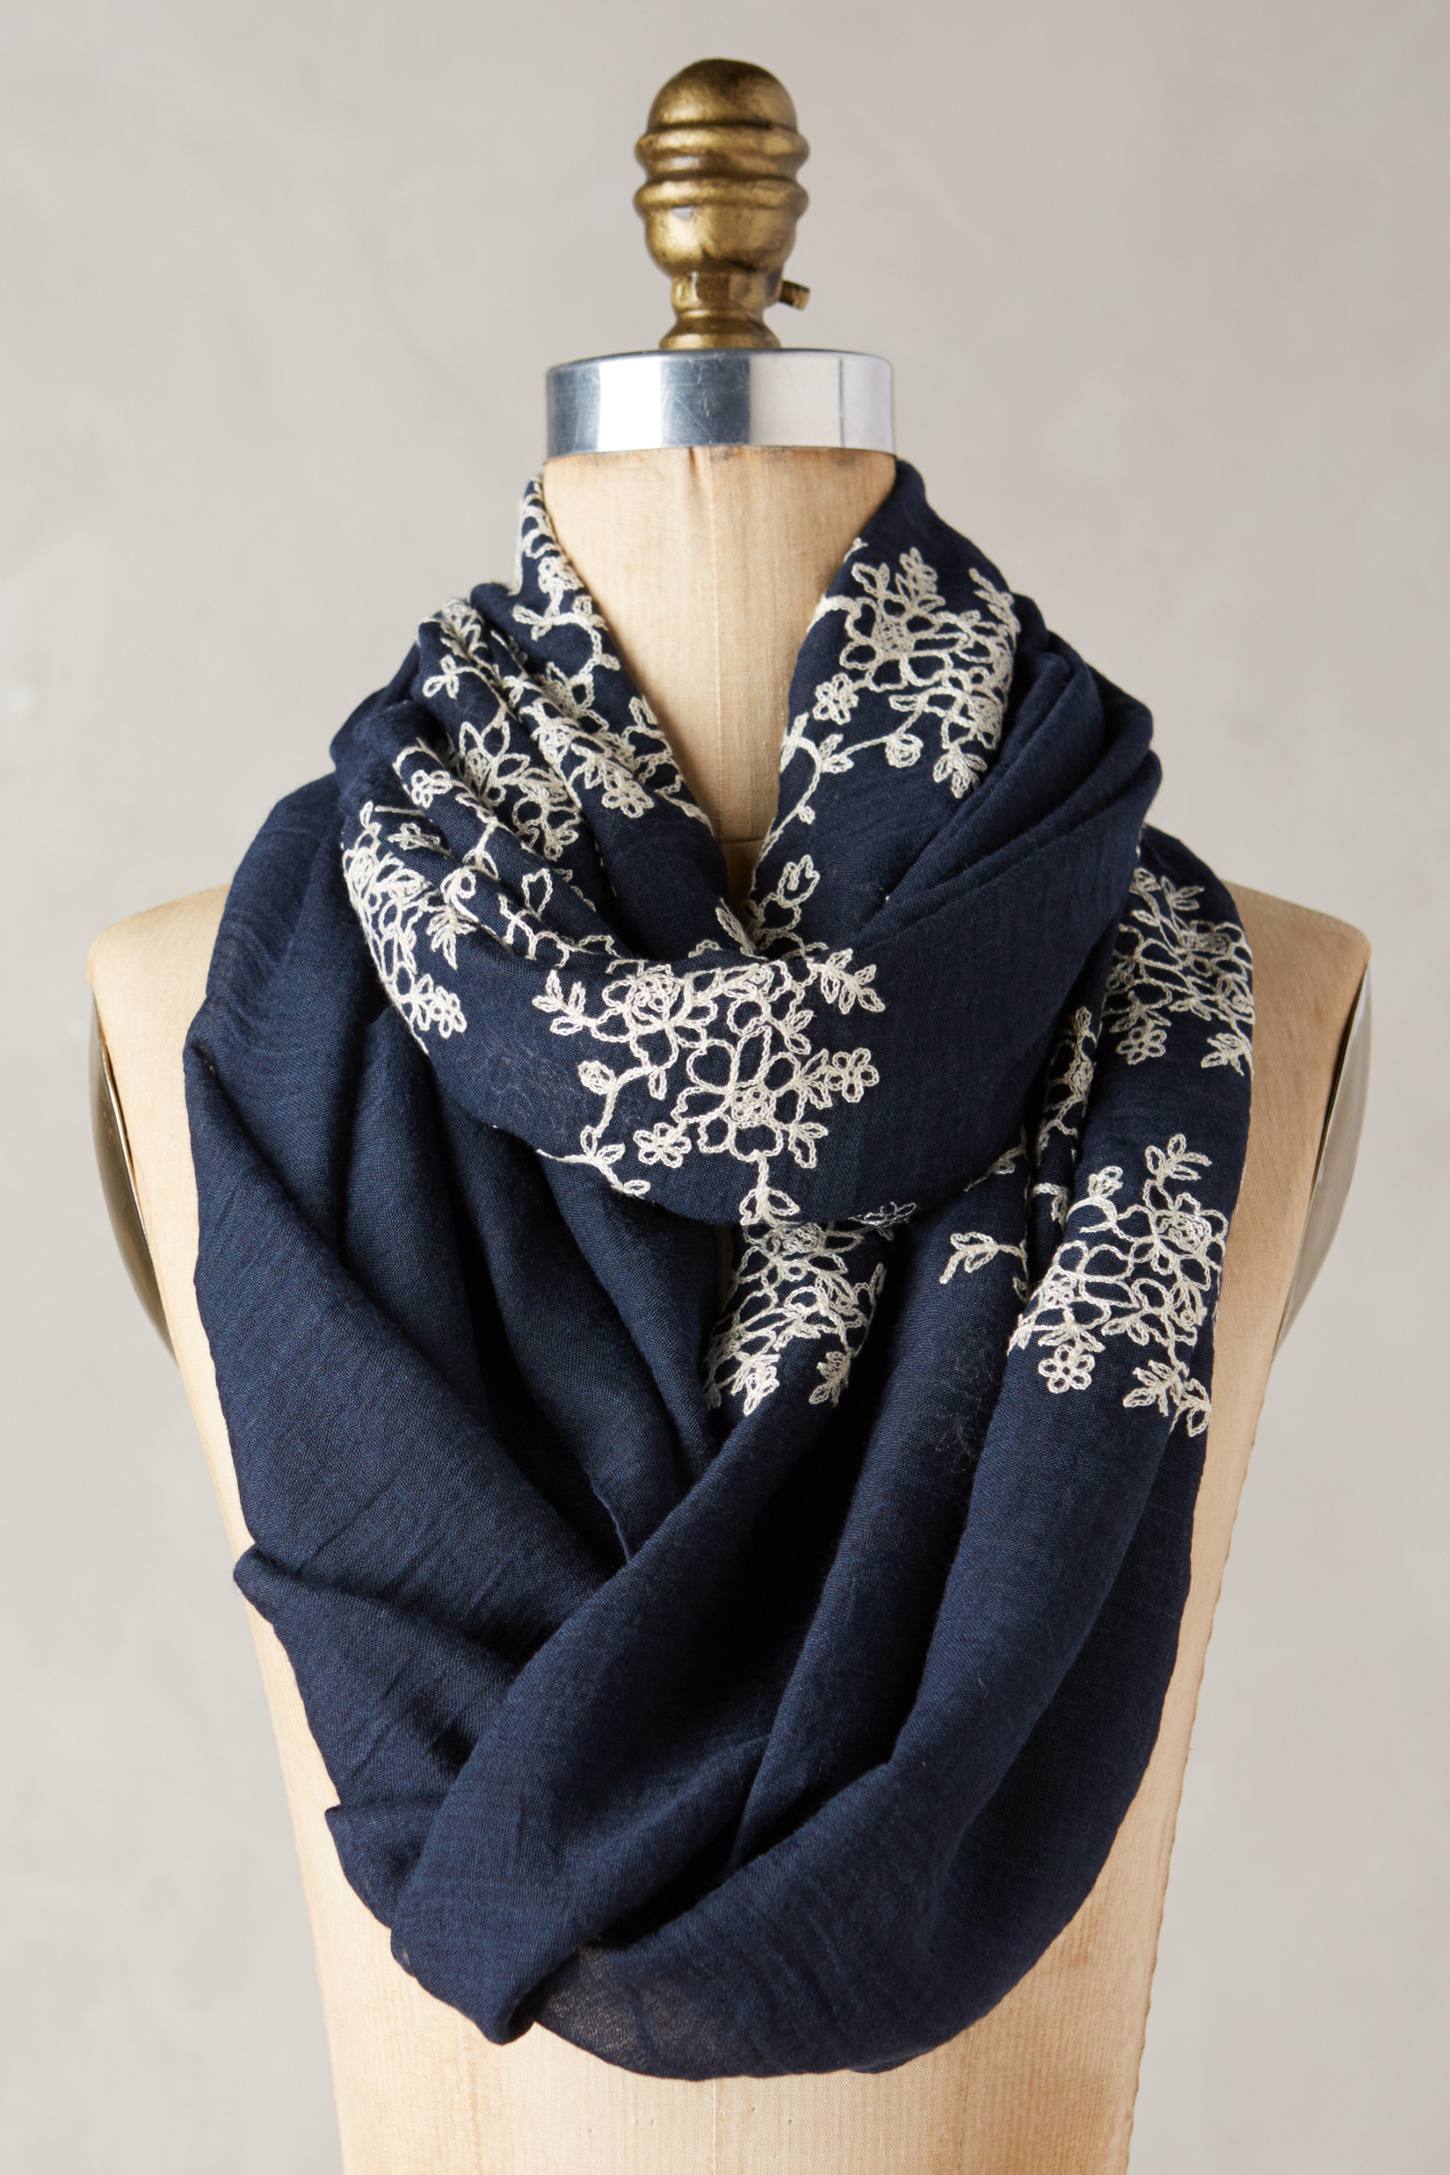 Embroidered Floriculture Scarf